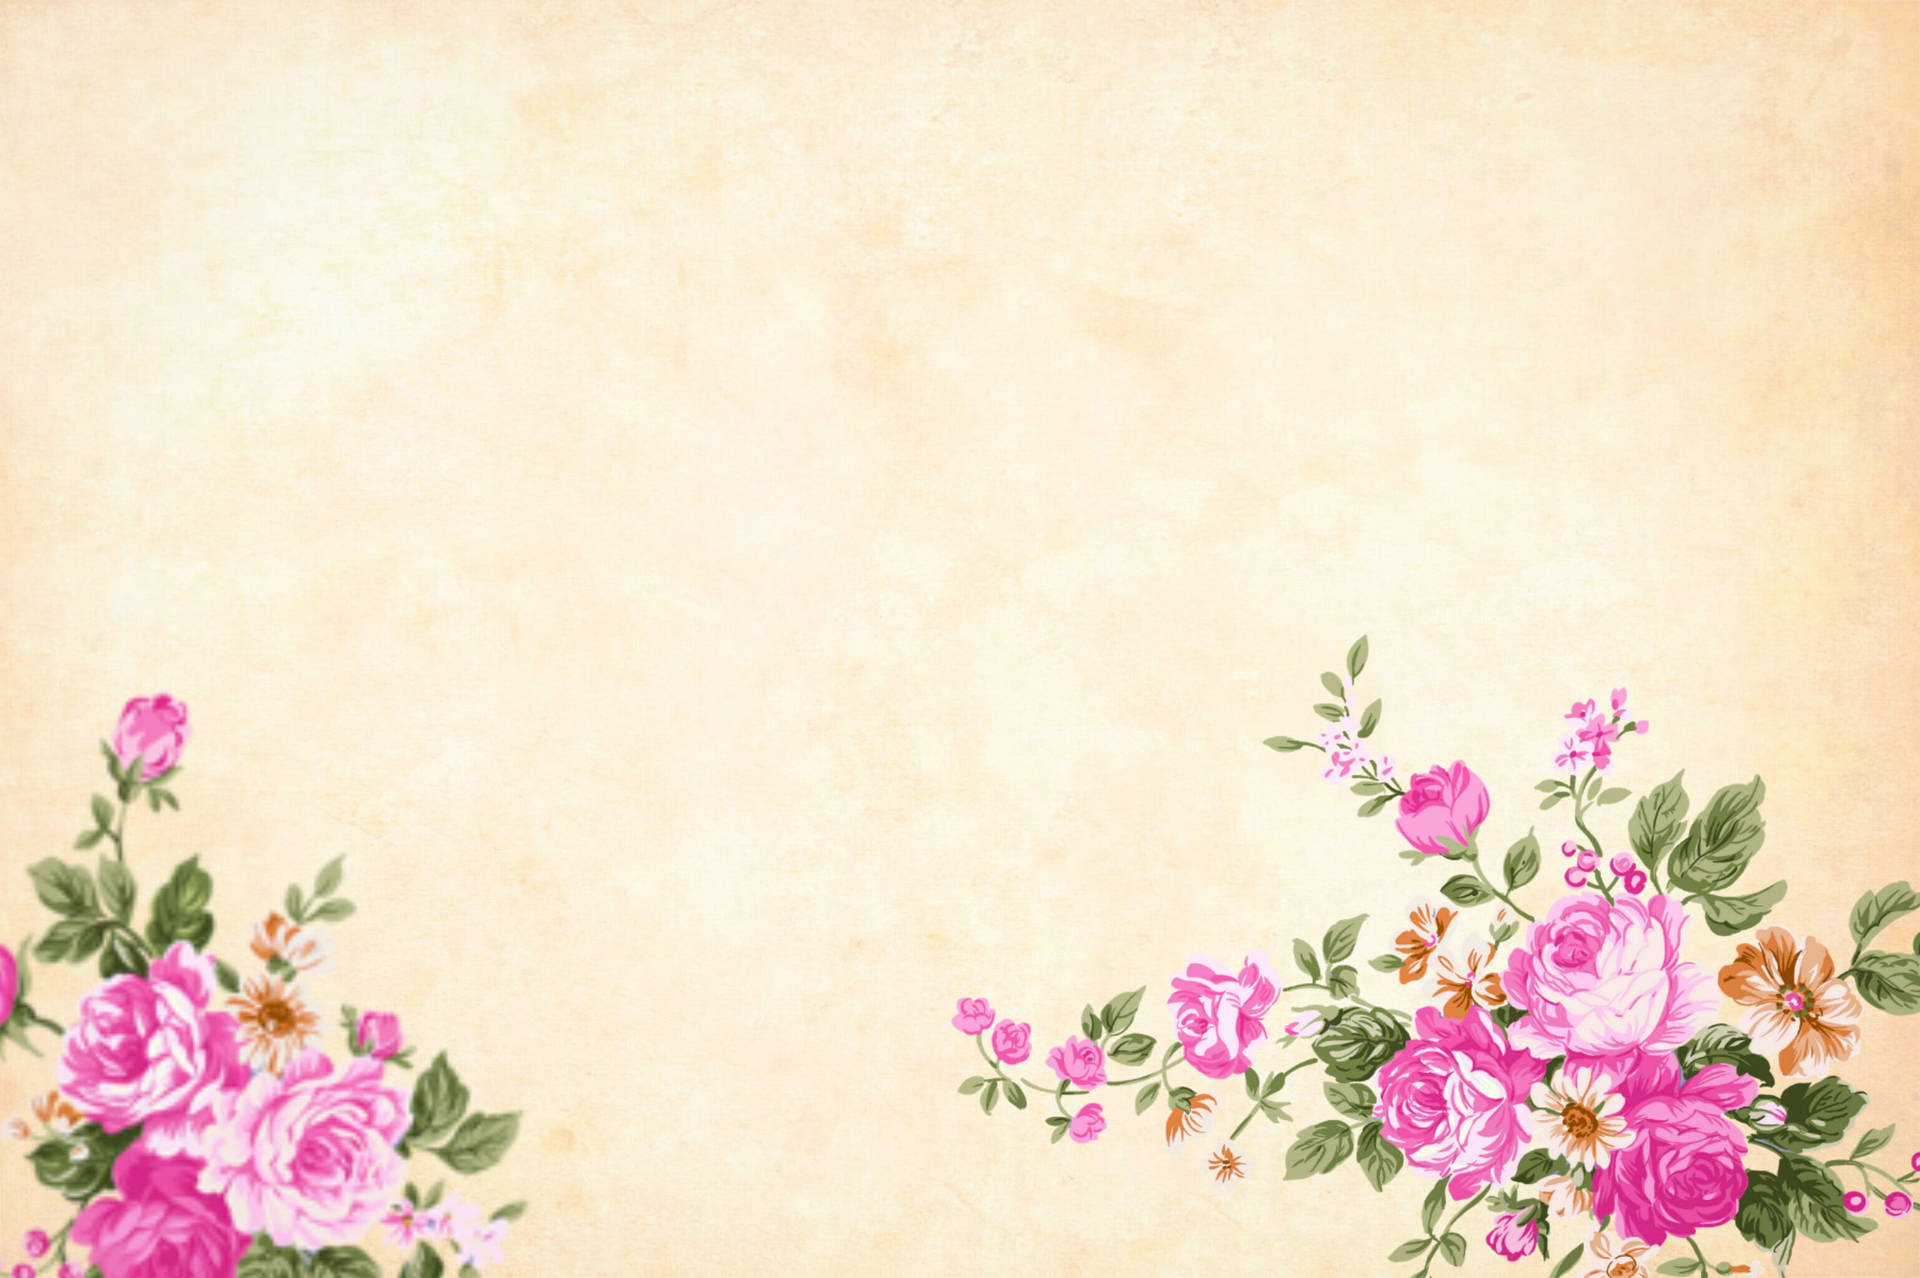 Background Design With Pink Flowers Wallpaper